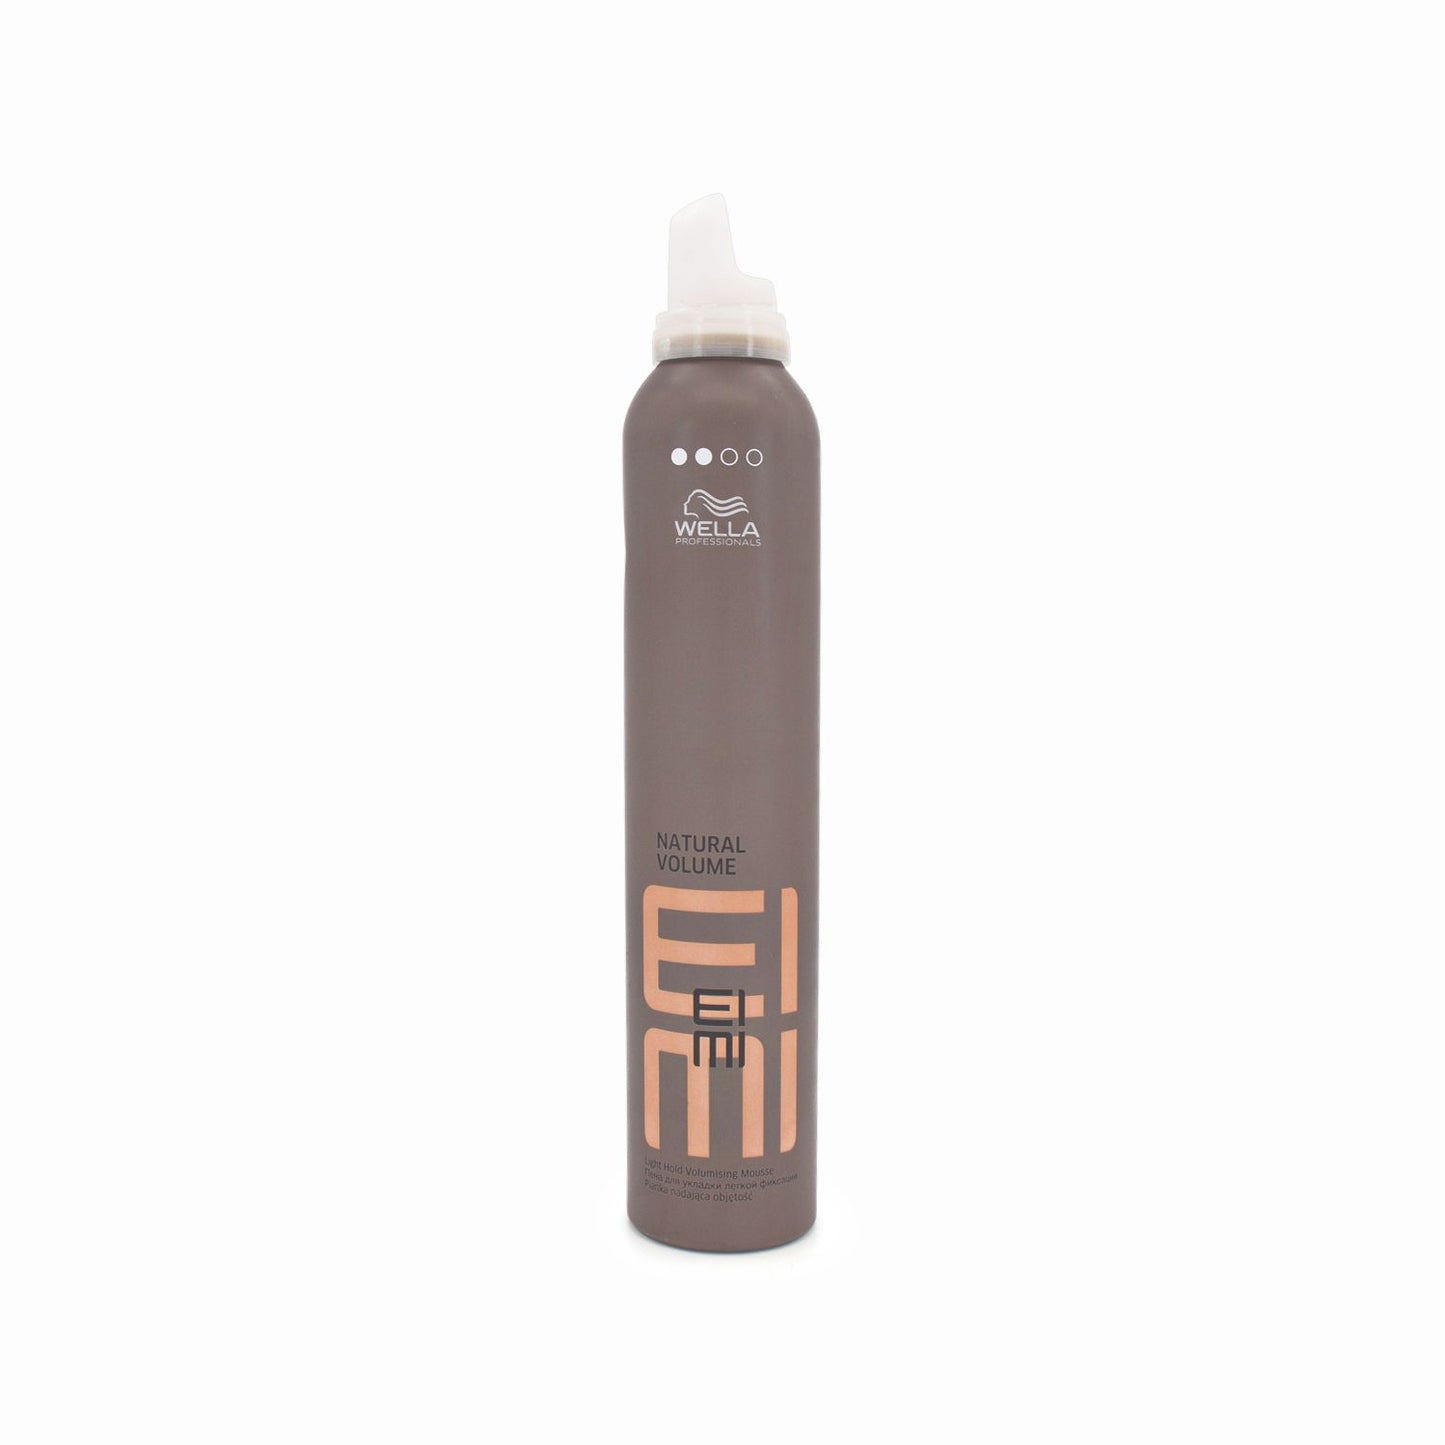 Wella Professionals EIMI Hair Mousse 300ml - Missing Lid & Imperfect Container